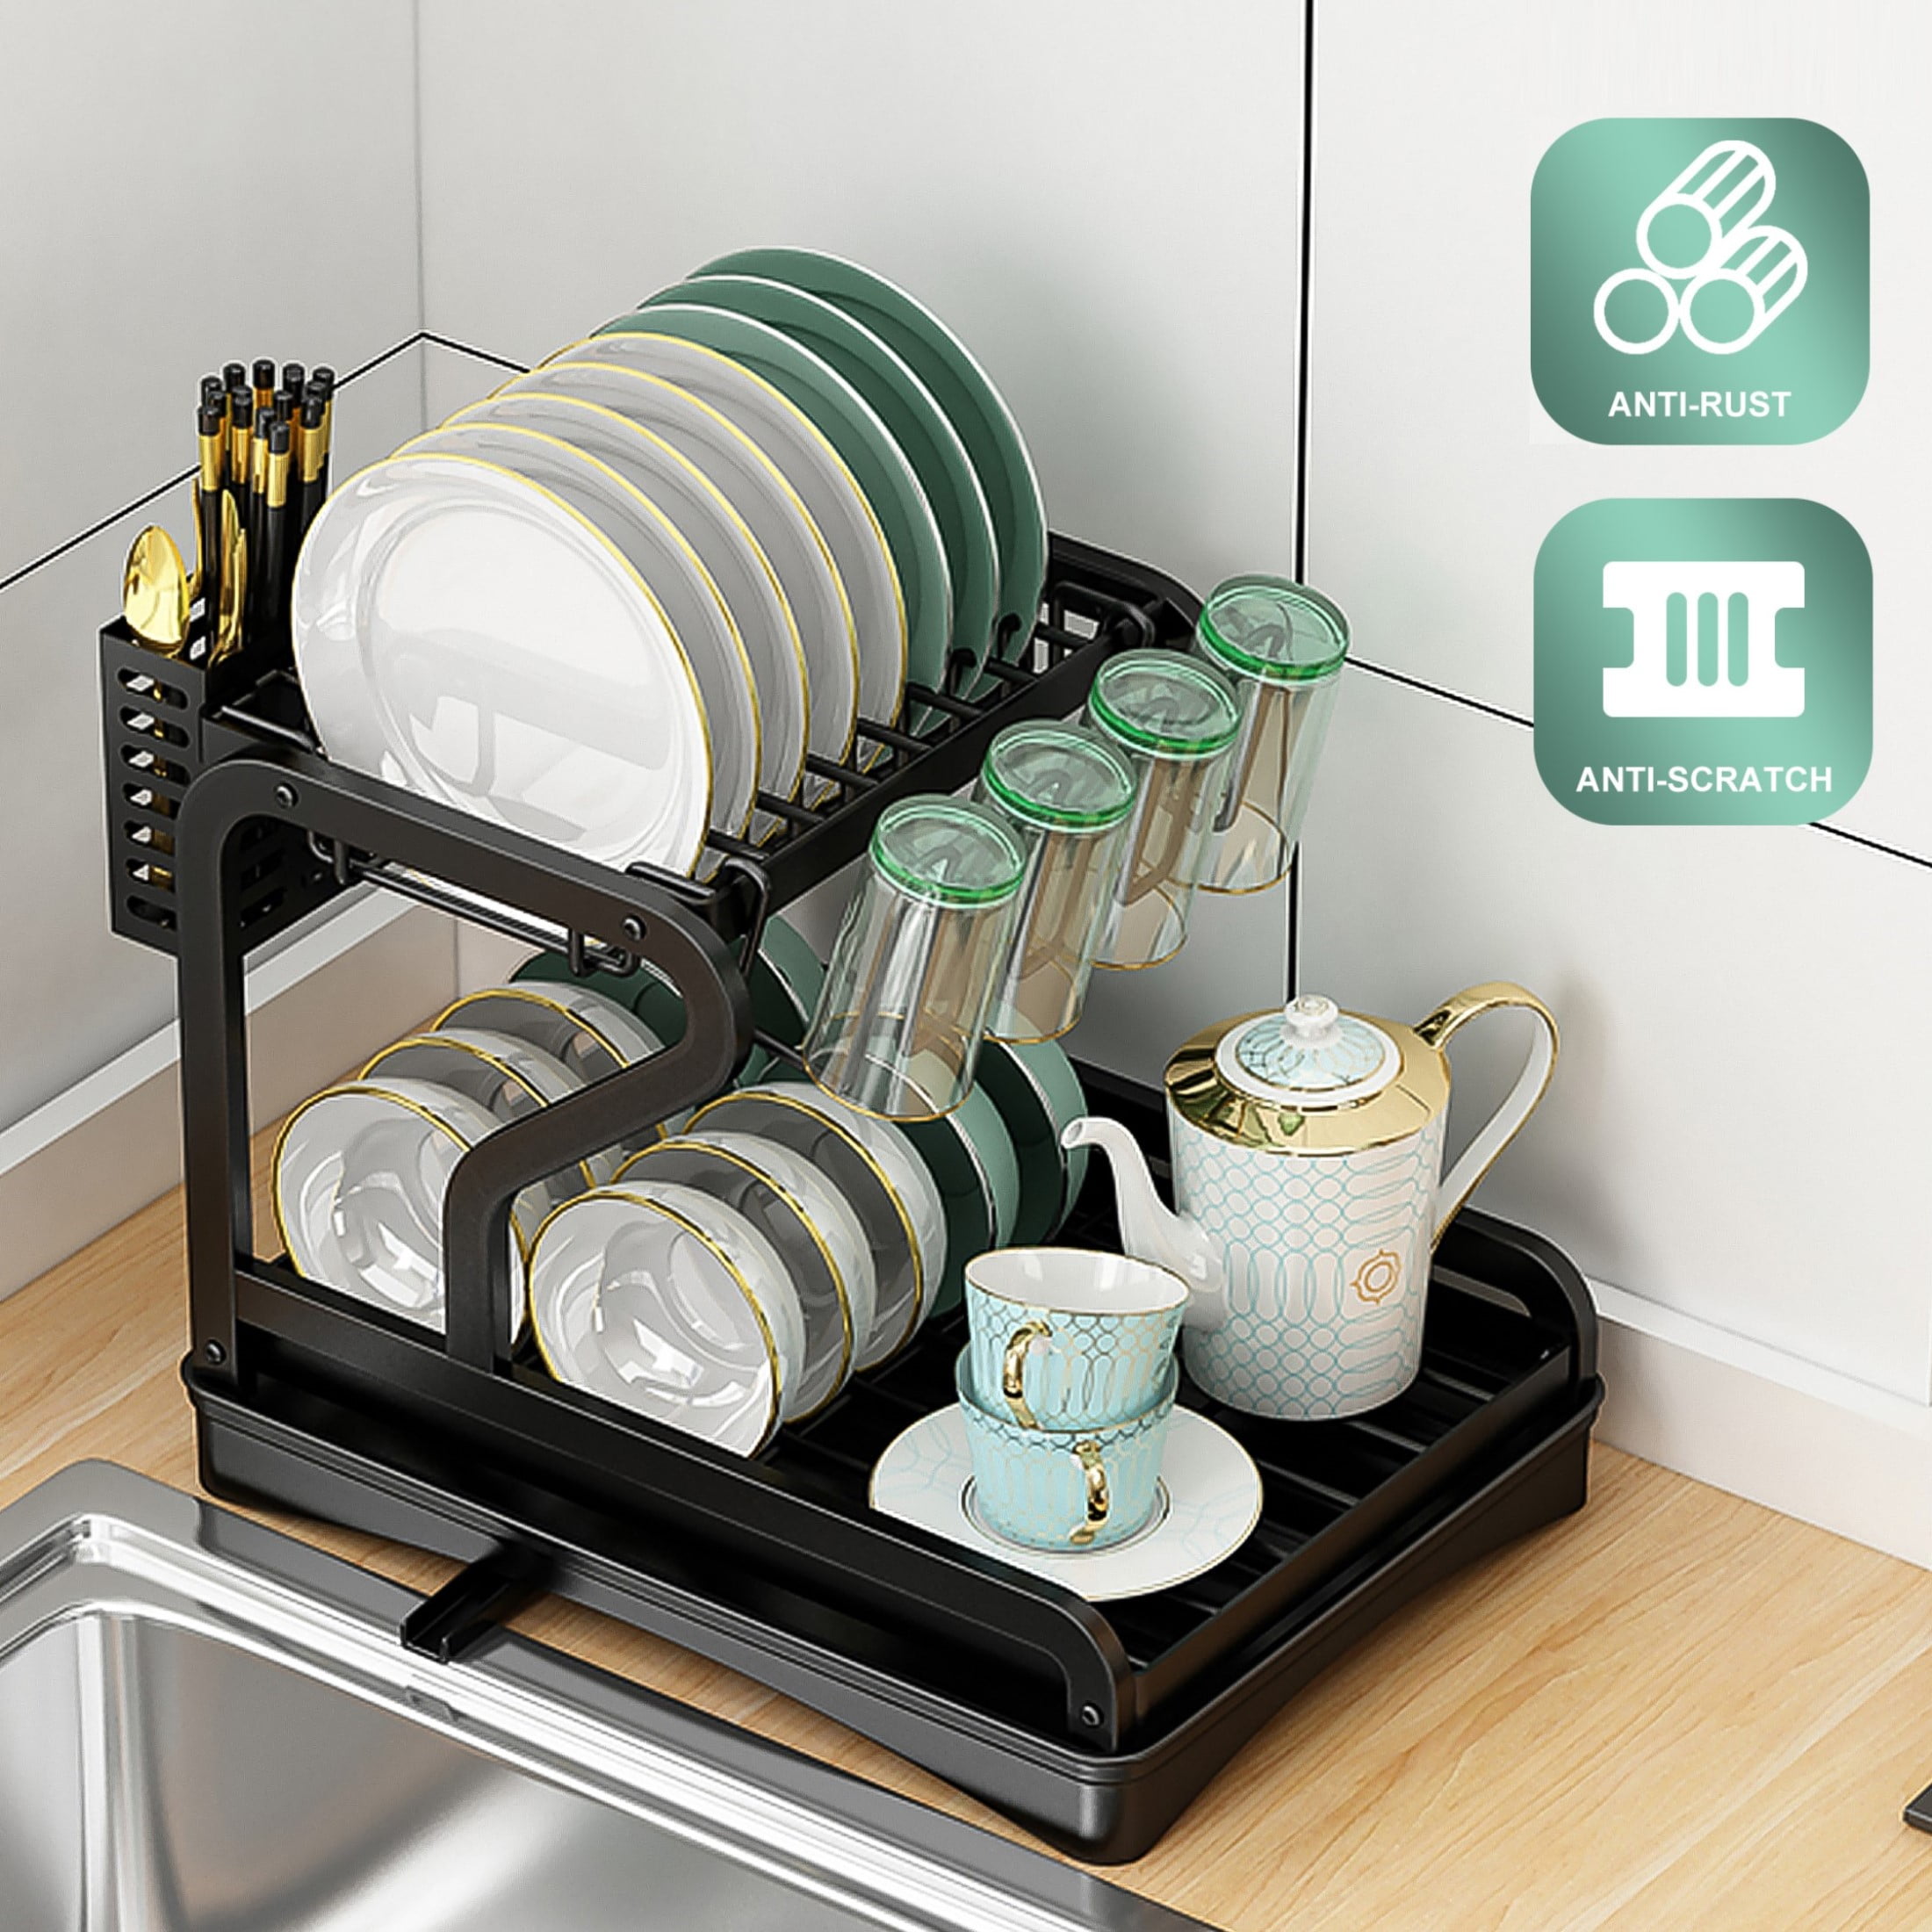 Dish Drying Rack, HERJOY Detachable 2 Tier Dish Rack and Drainboard Set, Large Capacity Dish Drainer Organizer Shelf with Utensil Holder, Cup Rack for